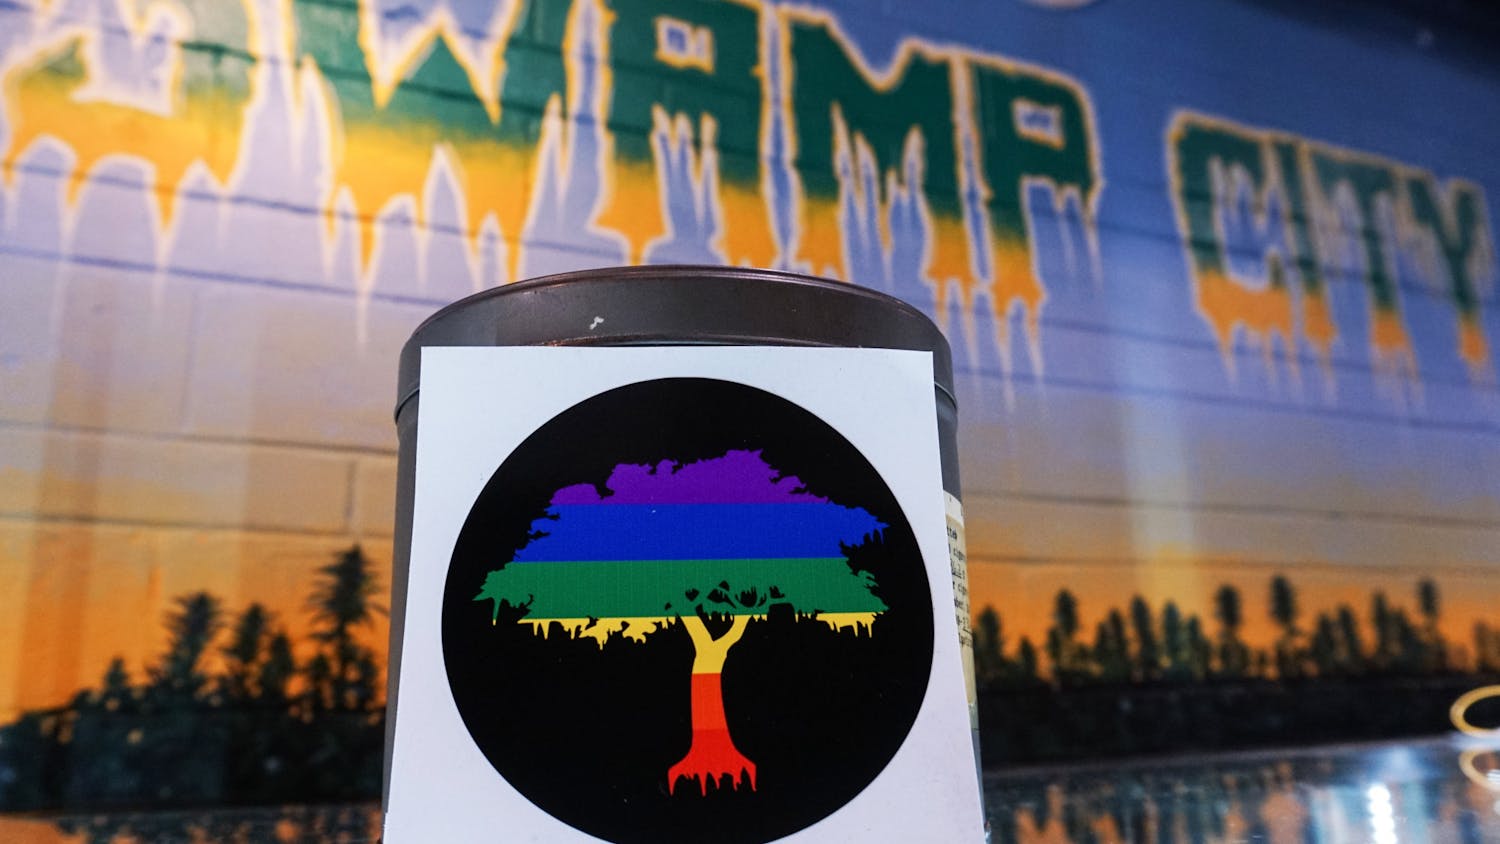 A Pride Tree sticker at Swamp City Gallery Lounge on Sunday, June 13, 2021. Swamp City is running a pride month campaign, where patrons can take a photo of pride tree stickers placed in different locations for a chance to win $300 worth of accessories and products.